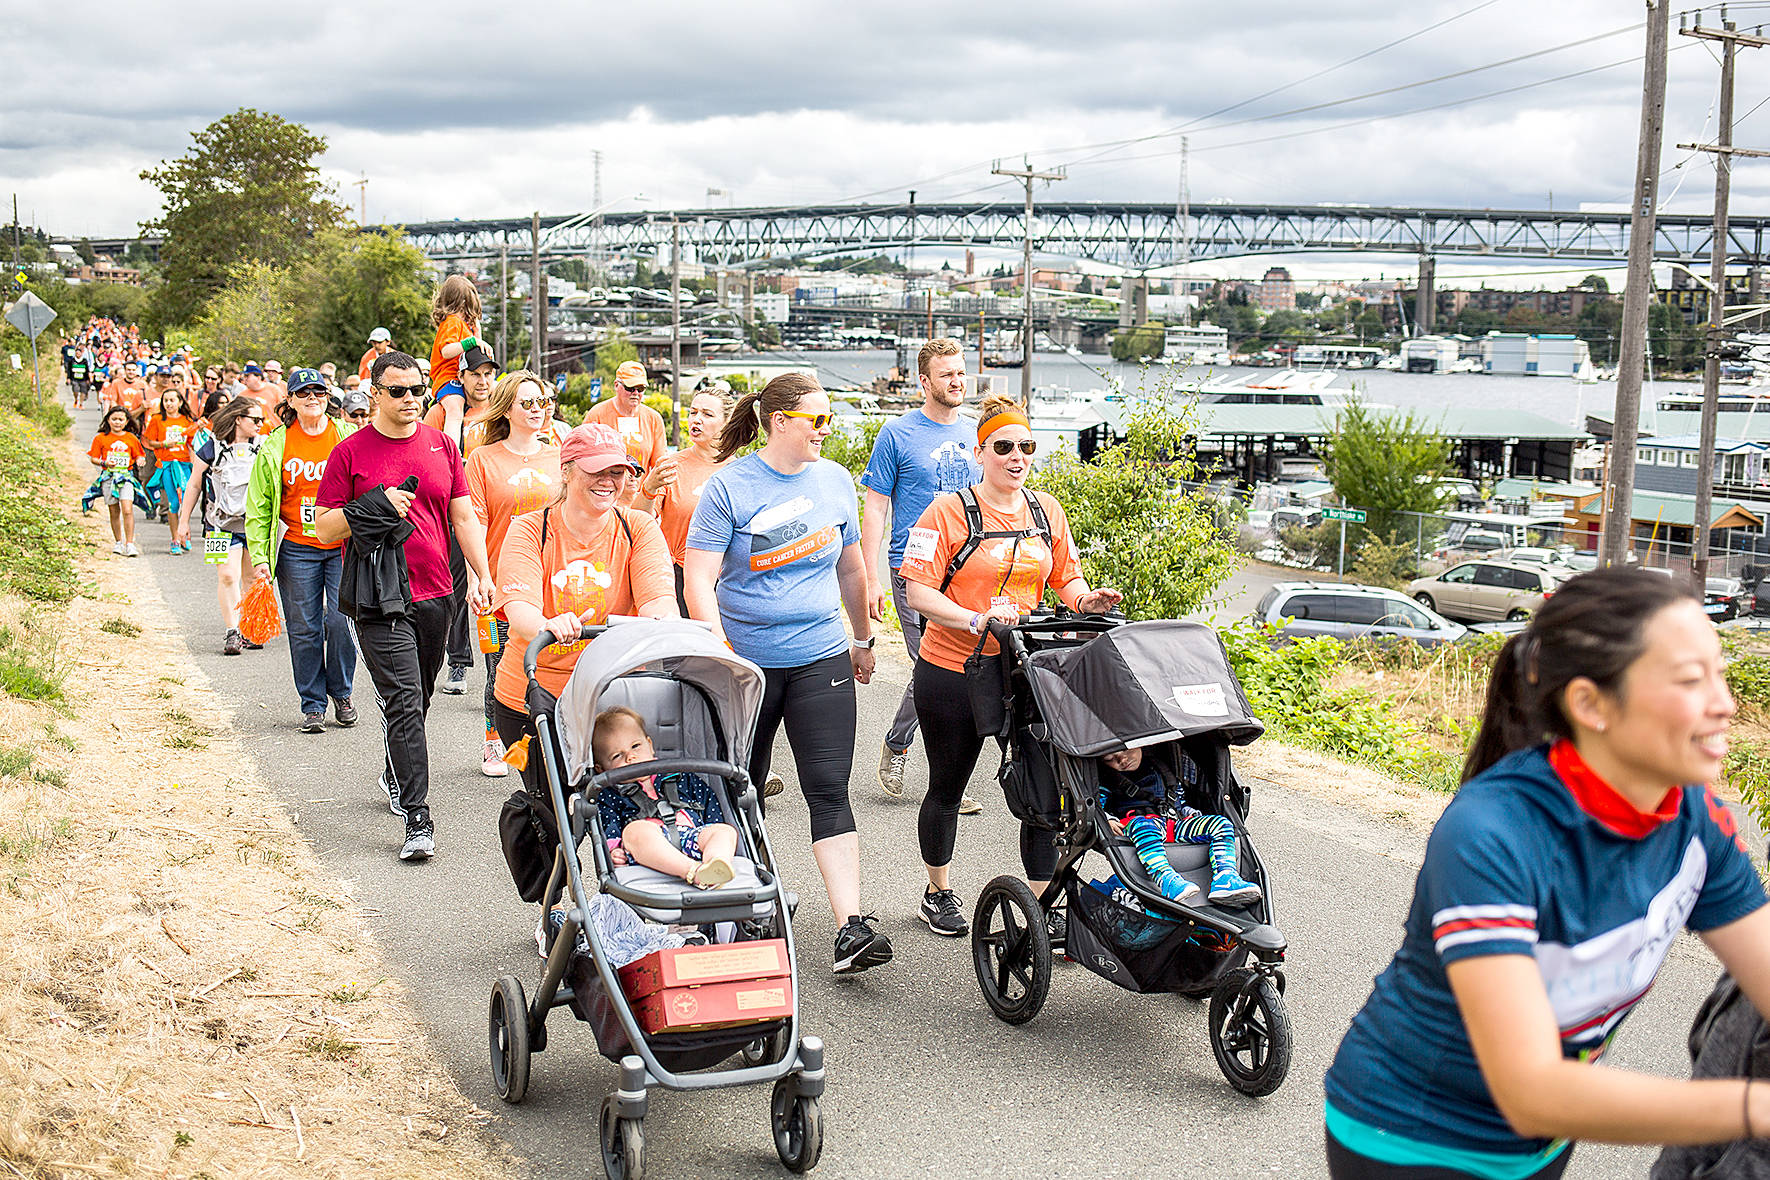 Hundreds of King County families walk during the 2018 Obliteride 5K. Photo courtesy of Fred Hutch Obliteride.                                 Hundreds of King County families walk during the 2018 Obliteride 5K. Photo courtesy of Fred Hutch Obliteride.                                 Hundreds of King County families walk during the 2018 Obliteride 5K. Photo courtesy of Fred Hutch Obliteride.                                 Hundreds of King County families walk during the 2018 Obliteride 5K. Photo courtesy of Fred Hutch Obliteride.